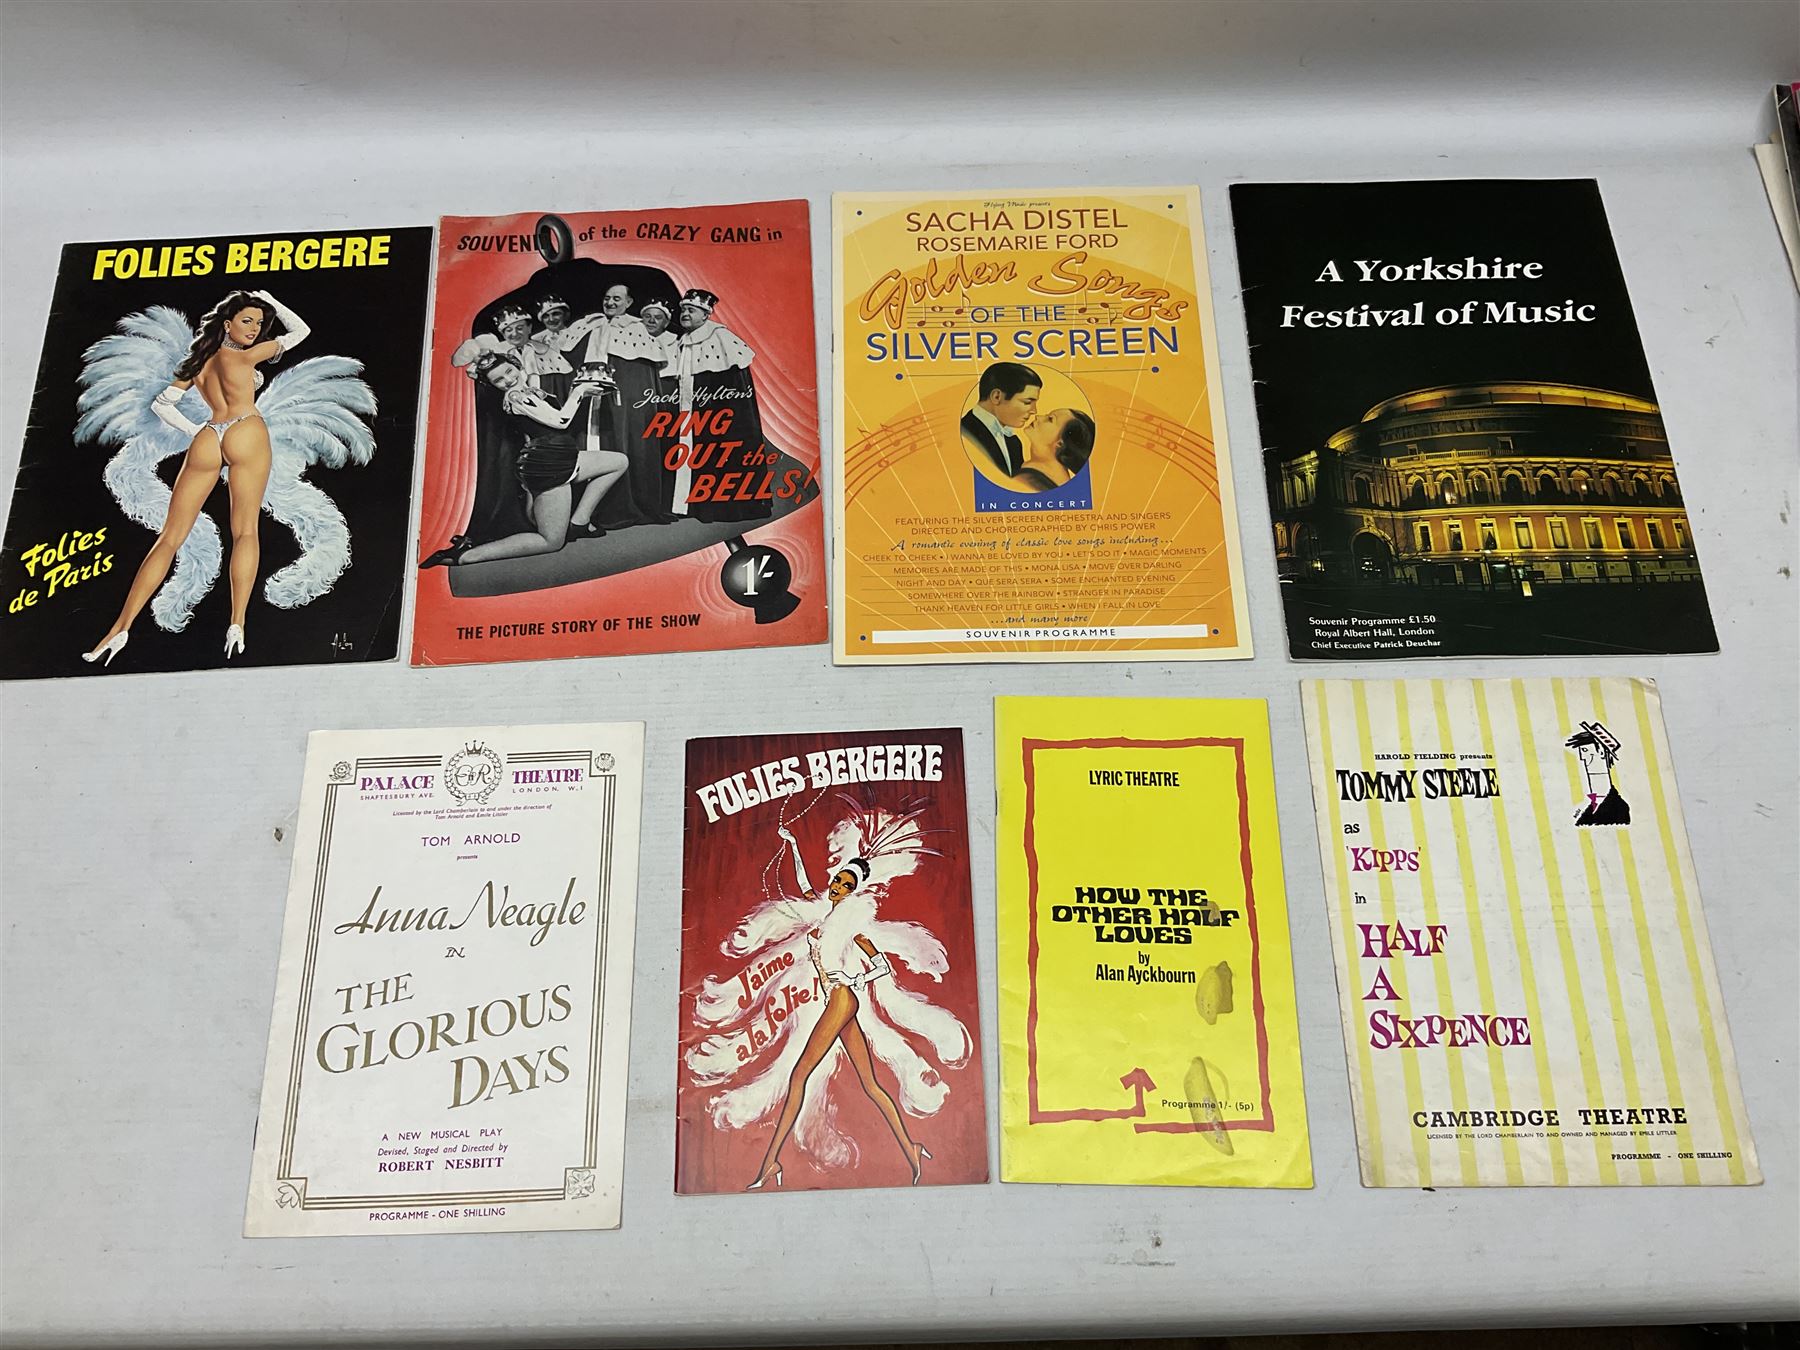 Over thirty theatre programmes 1940s and later including various London theatres - Apollo - Image 12 of 12